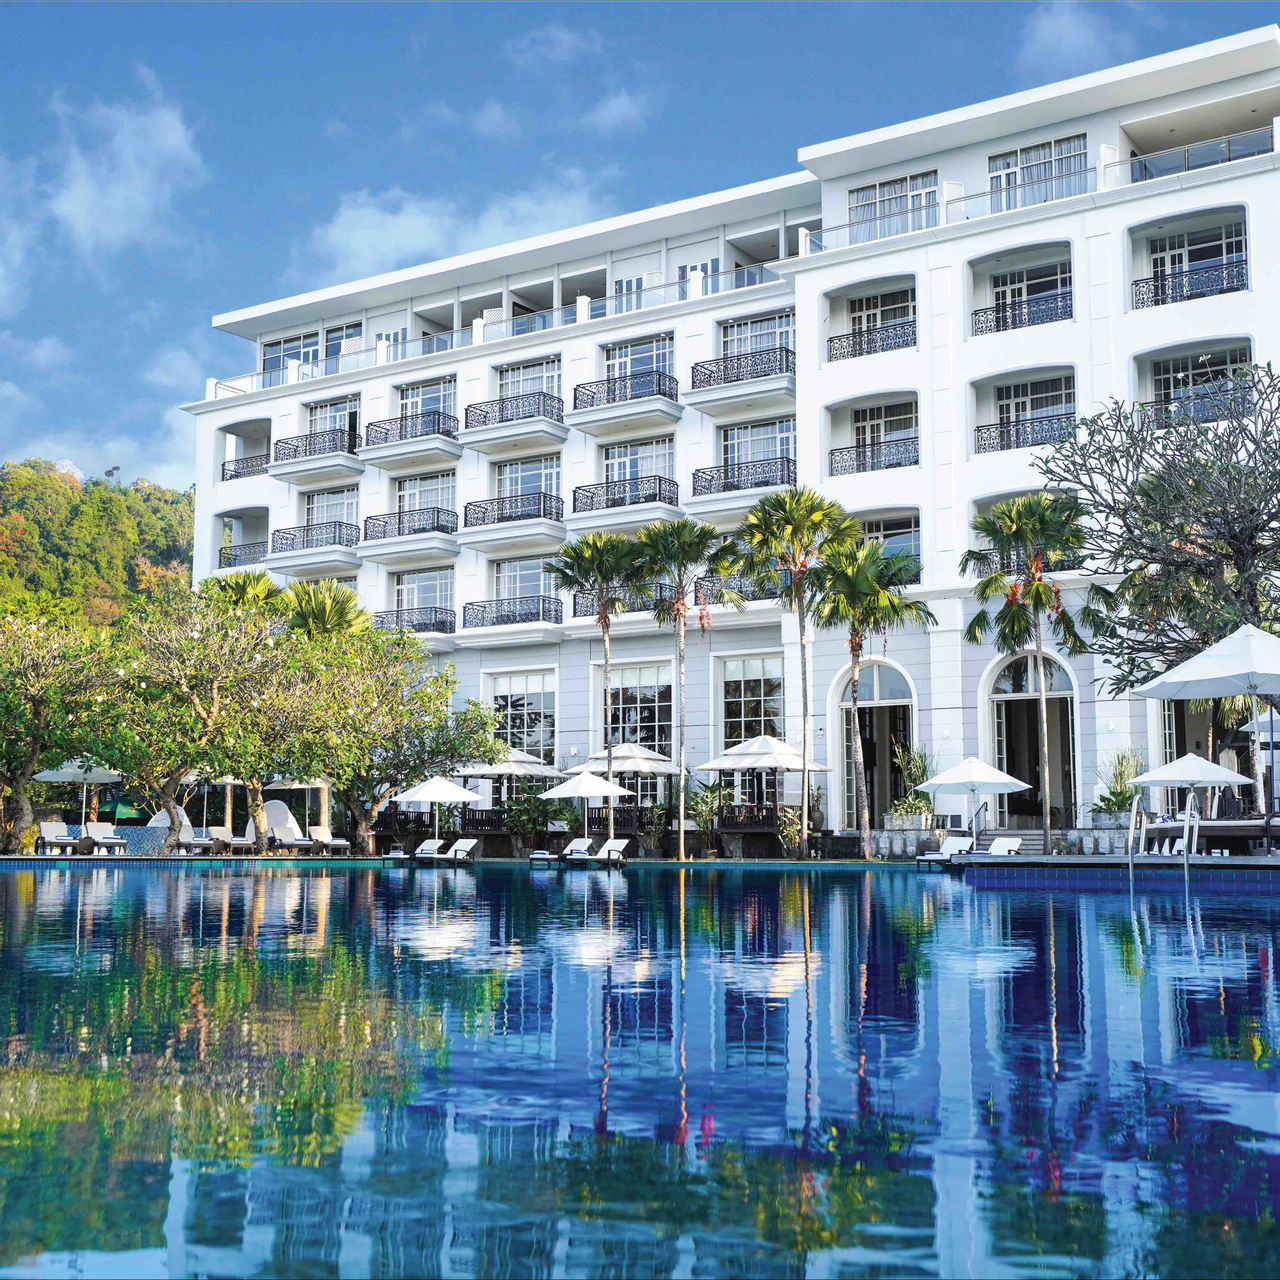 Exterior & Views 1, The Danna Langkawi - A Member of Small Luxury Hotels of the World, Langkawi